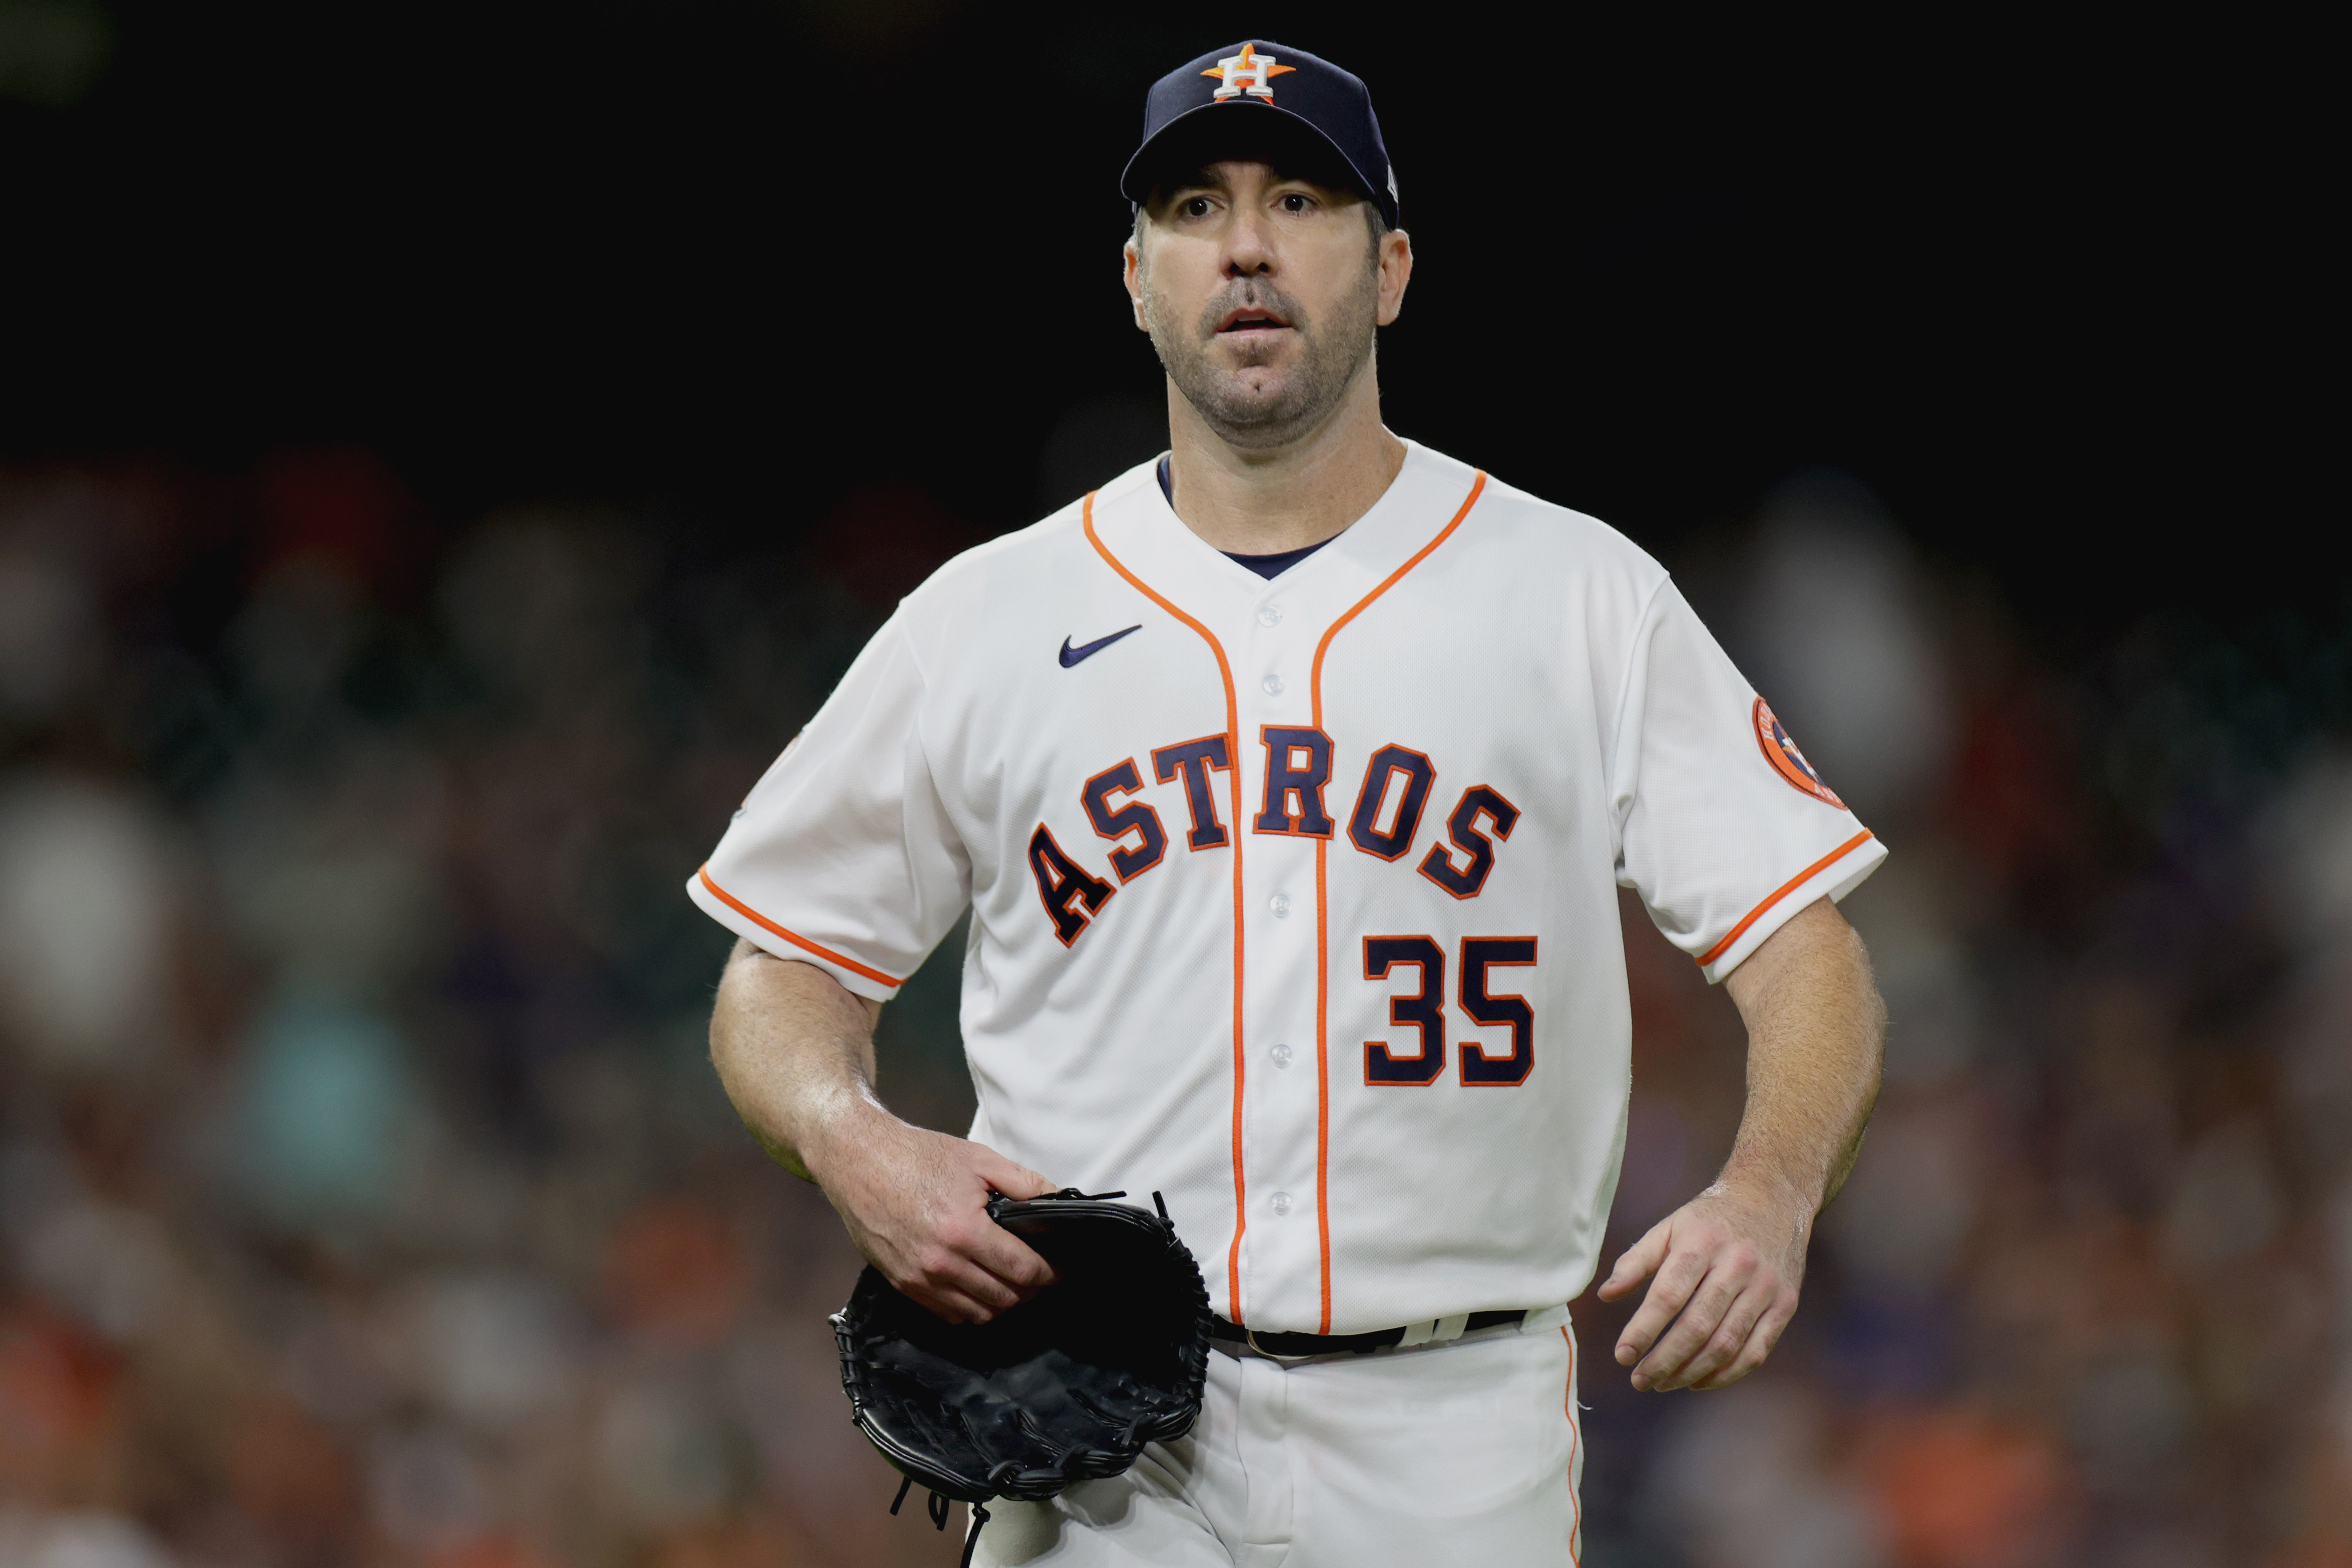 Justin Verlander #35 of the Houston Astros walks back the dugout after getting out of the fourth inning against the Minnesota Twins at Minute Maid Park on August 23, 2022 in Houston, Texas.